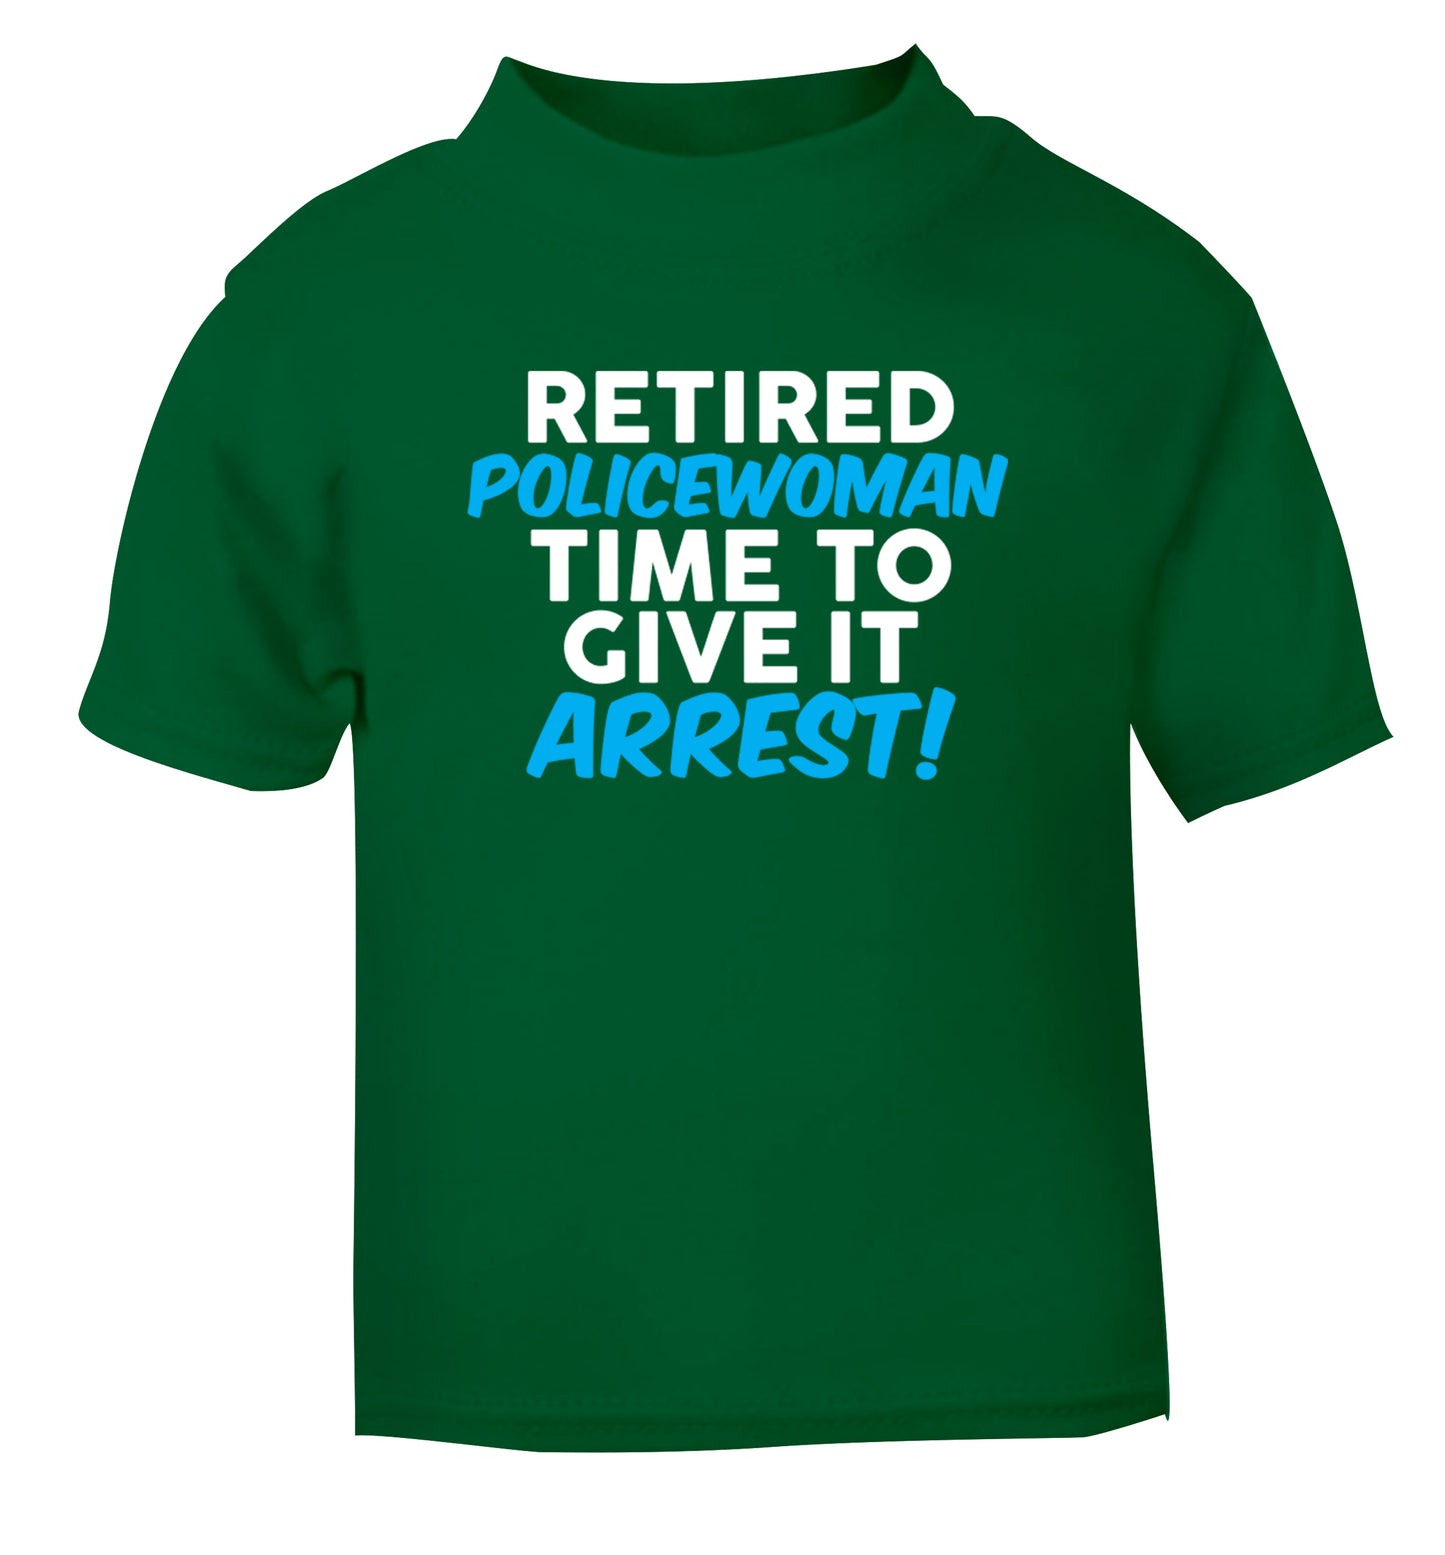 Retired policewoman time to give it arrest green Baby Toddler Tshirt 2 Years